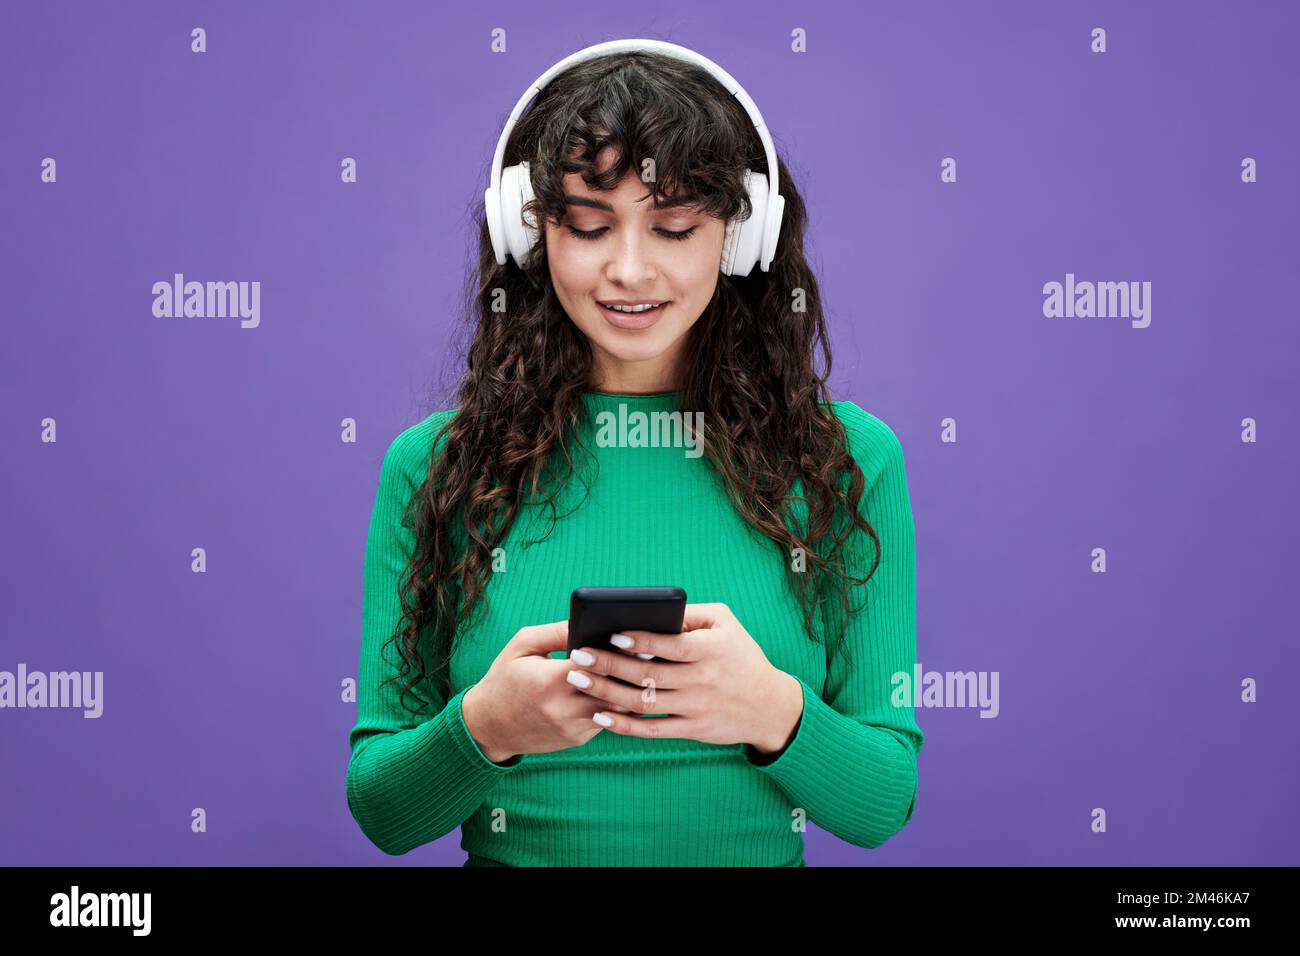 Pretty girl with dark long wavy hair scrolling through playlist in mobile phone and listening to her favorite music in headphones Stock Photo